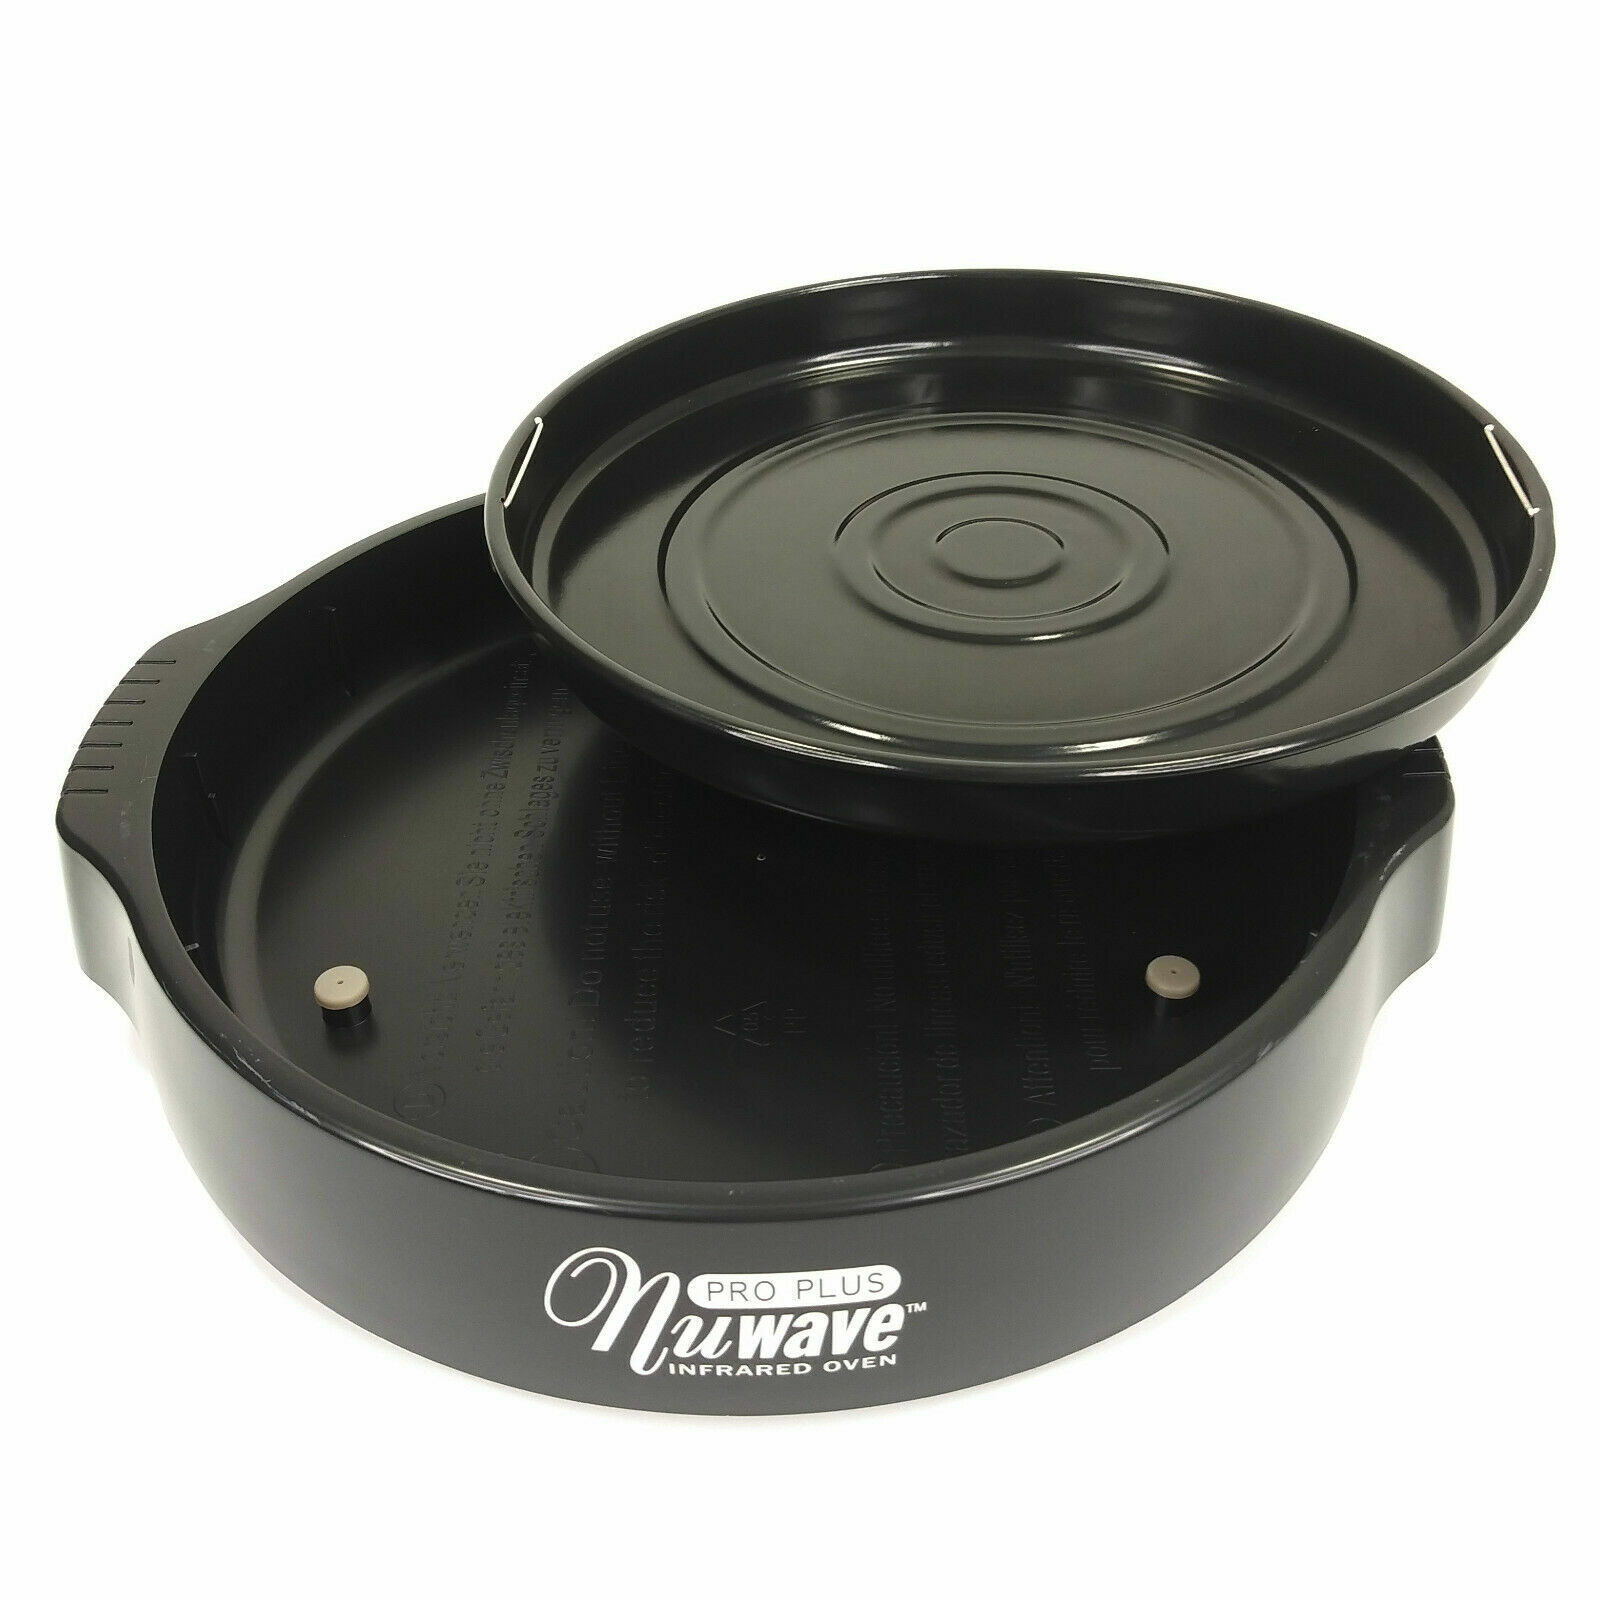 NEW NuWave Pro Plus Infrared Oven Inexpensive Replaceme Base Liner 12